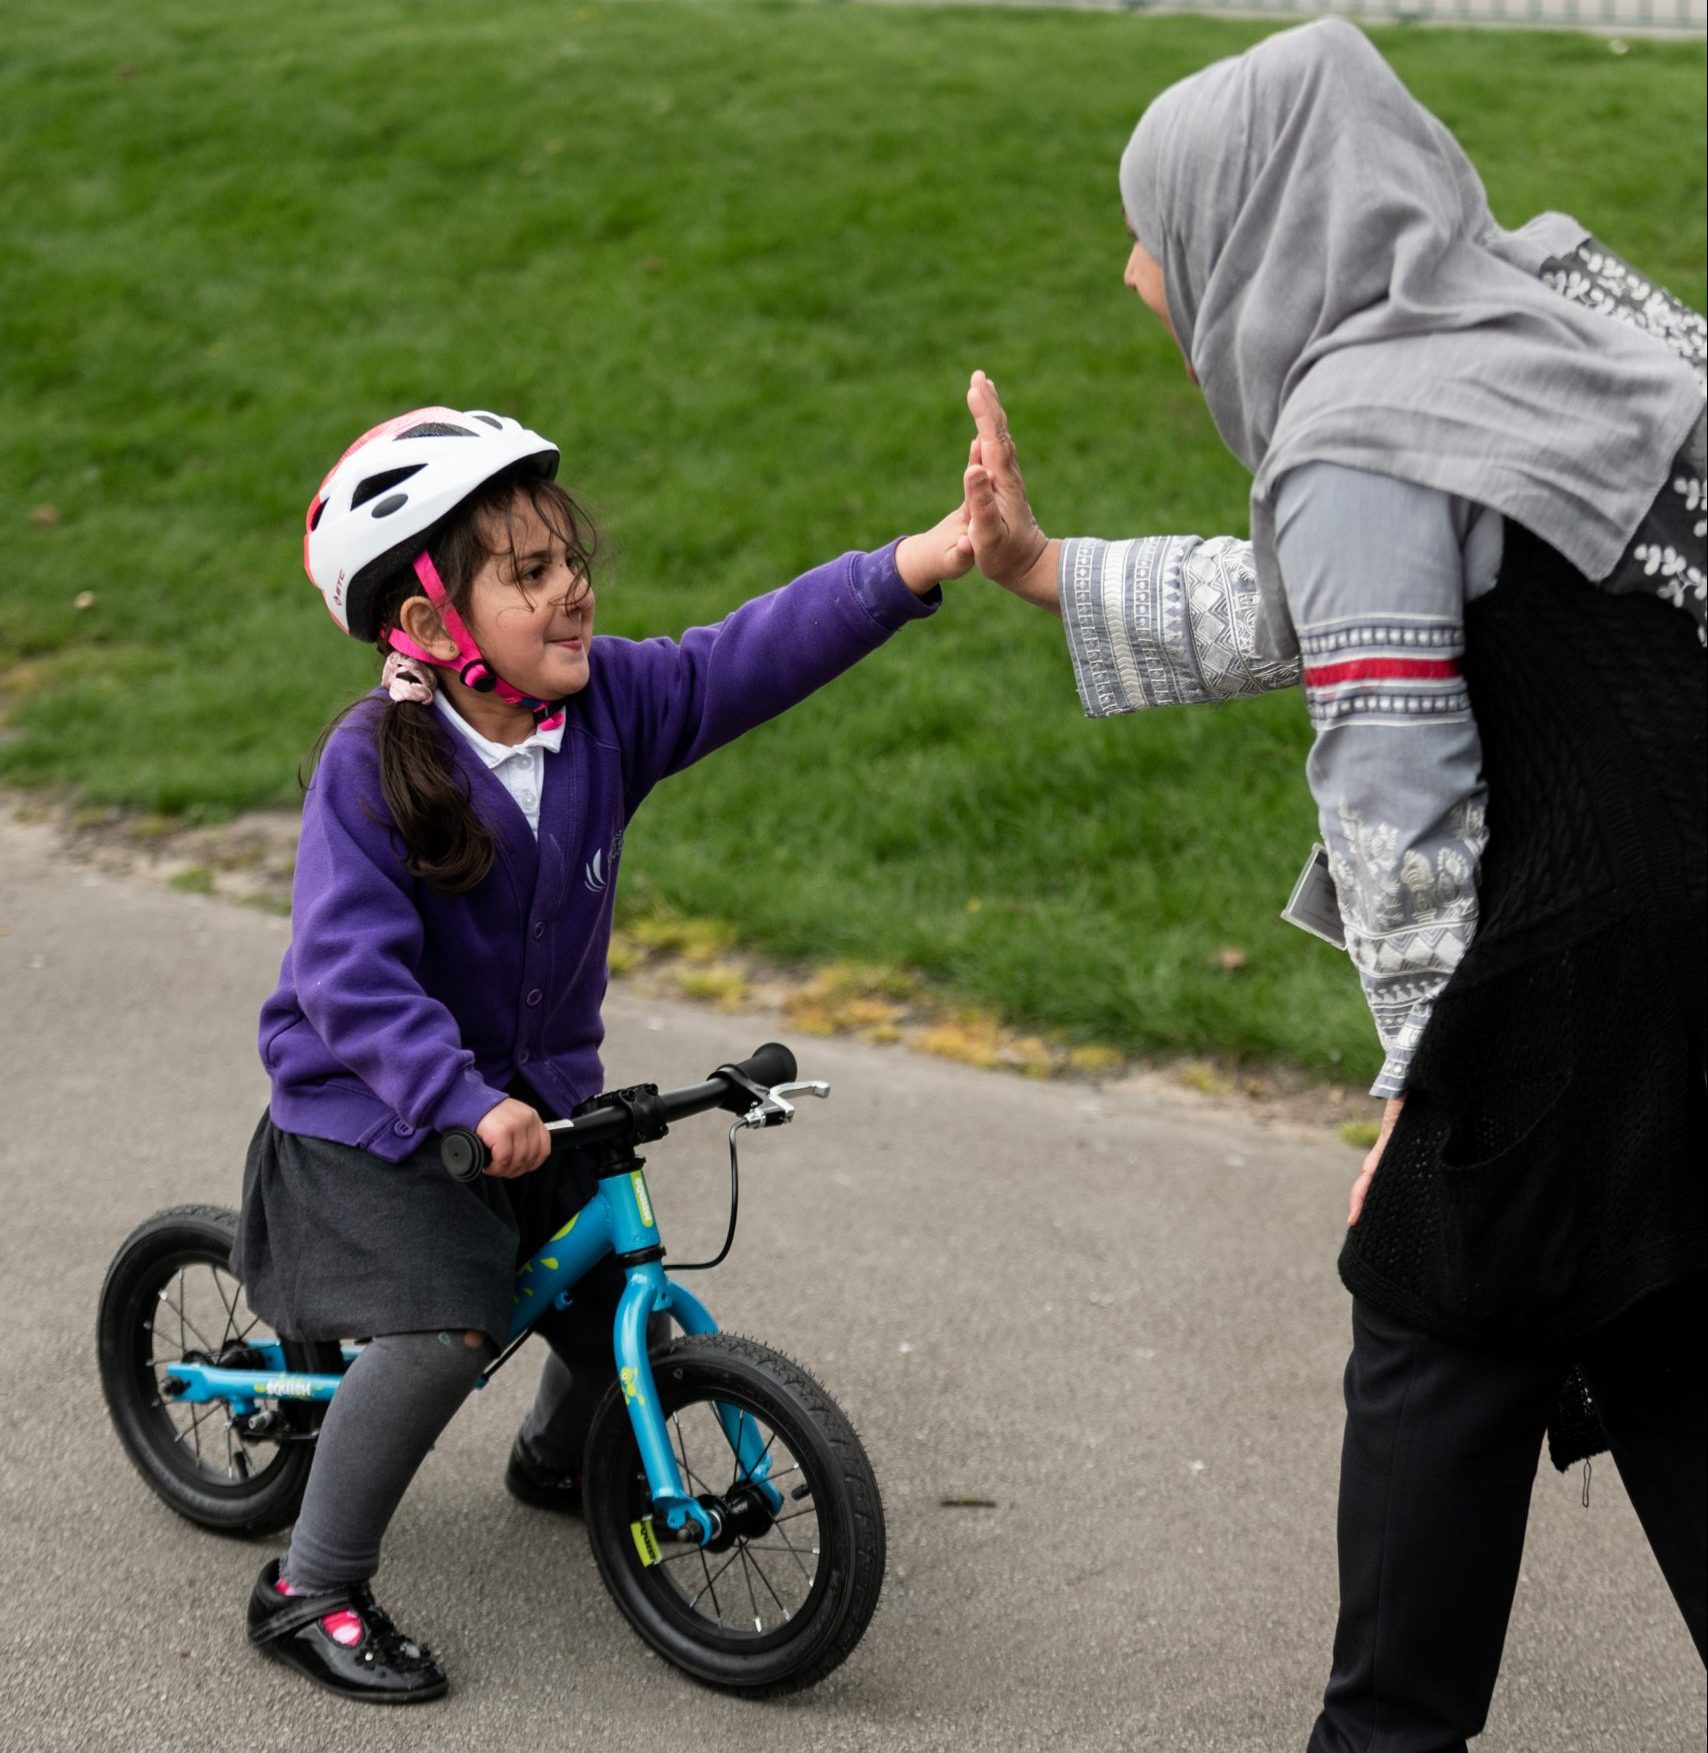 A young girl riding a balance bike high fives a woman on a playground.